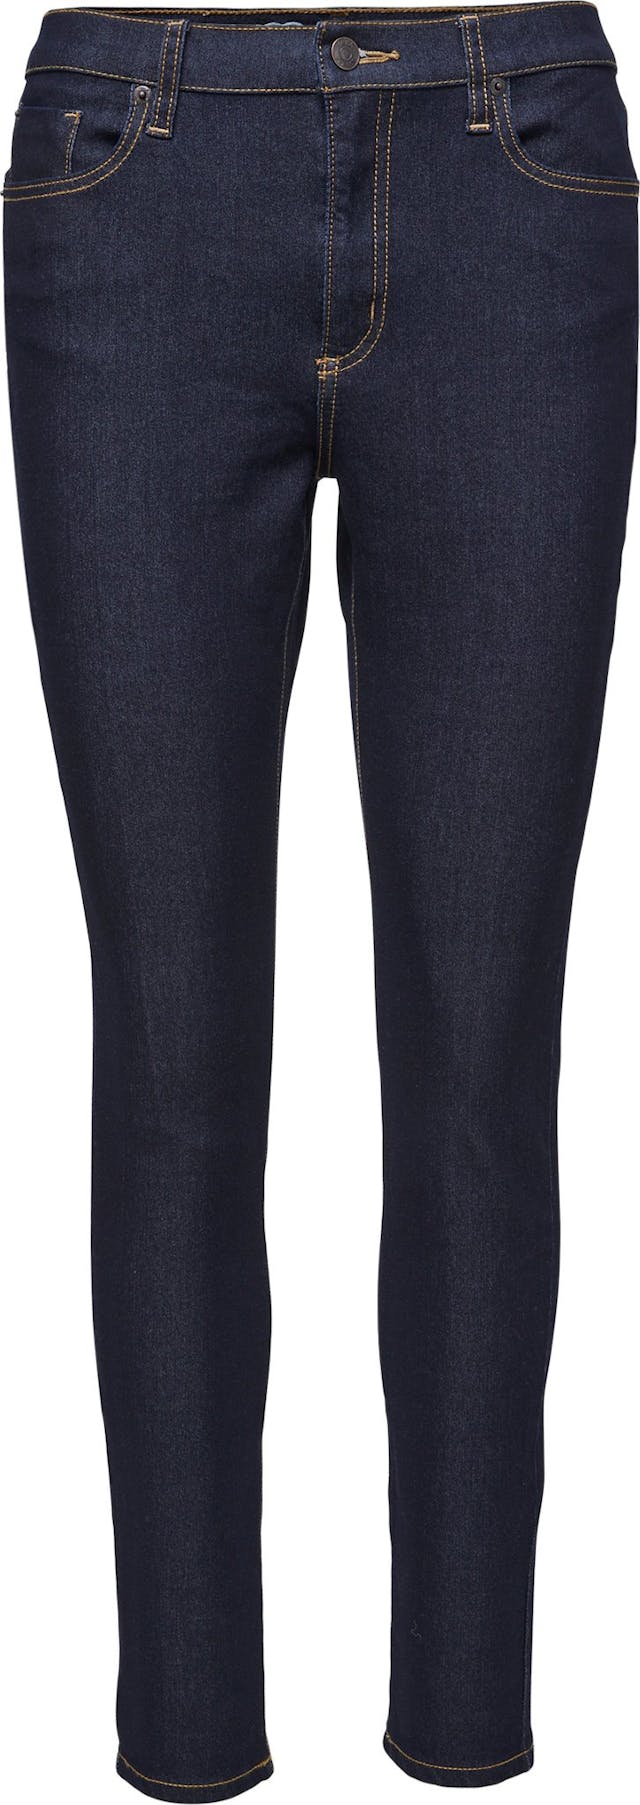 Product image for Rachel Classic Rise Skinny Jeans - Women's